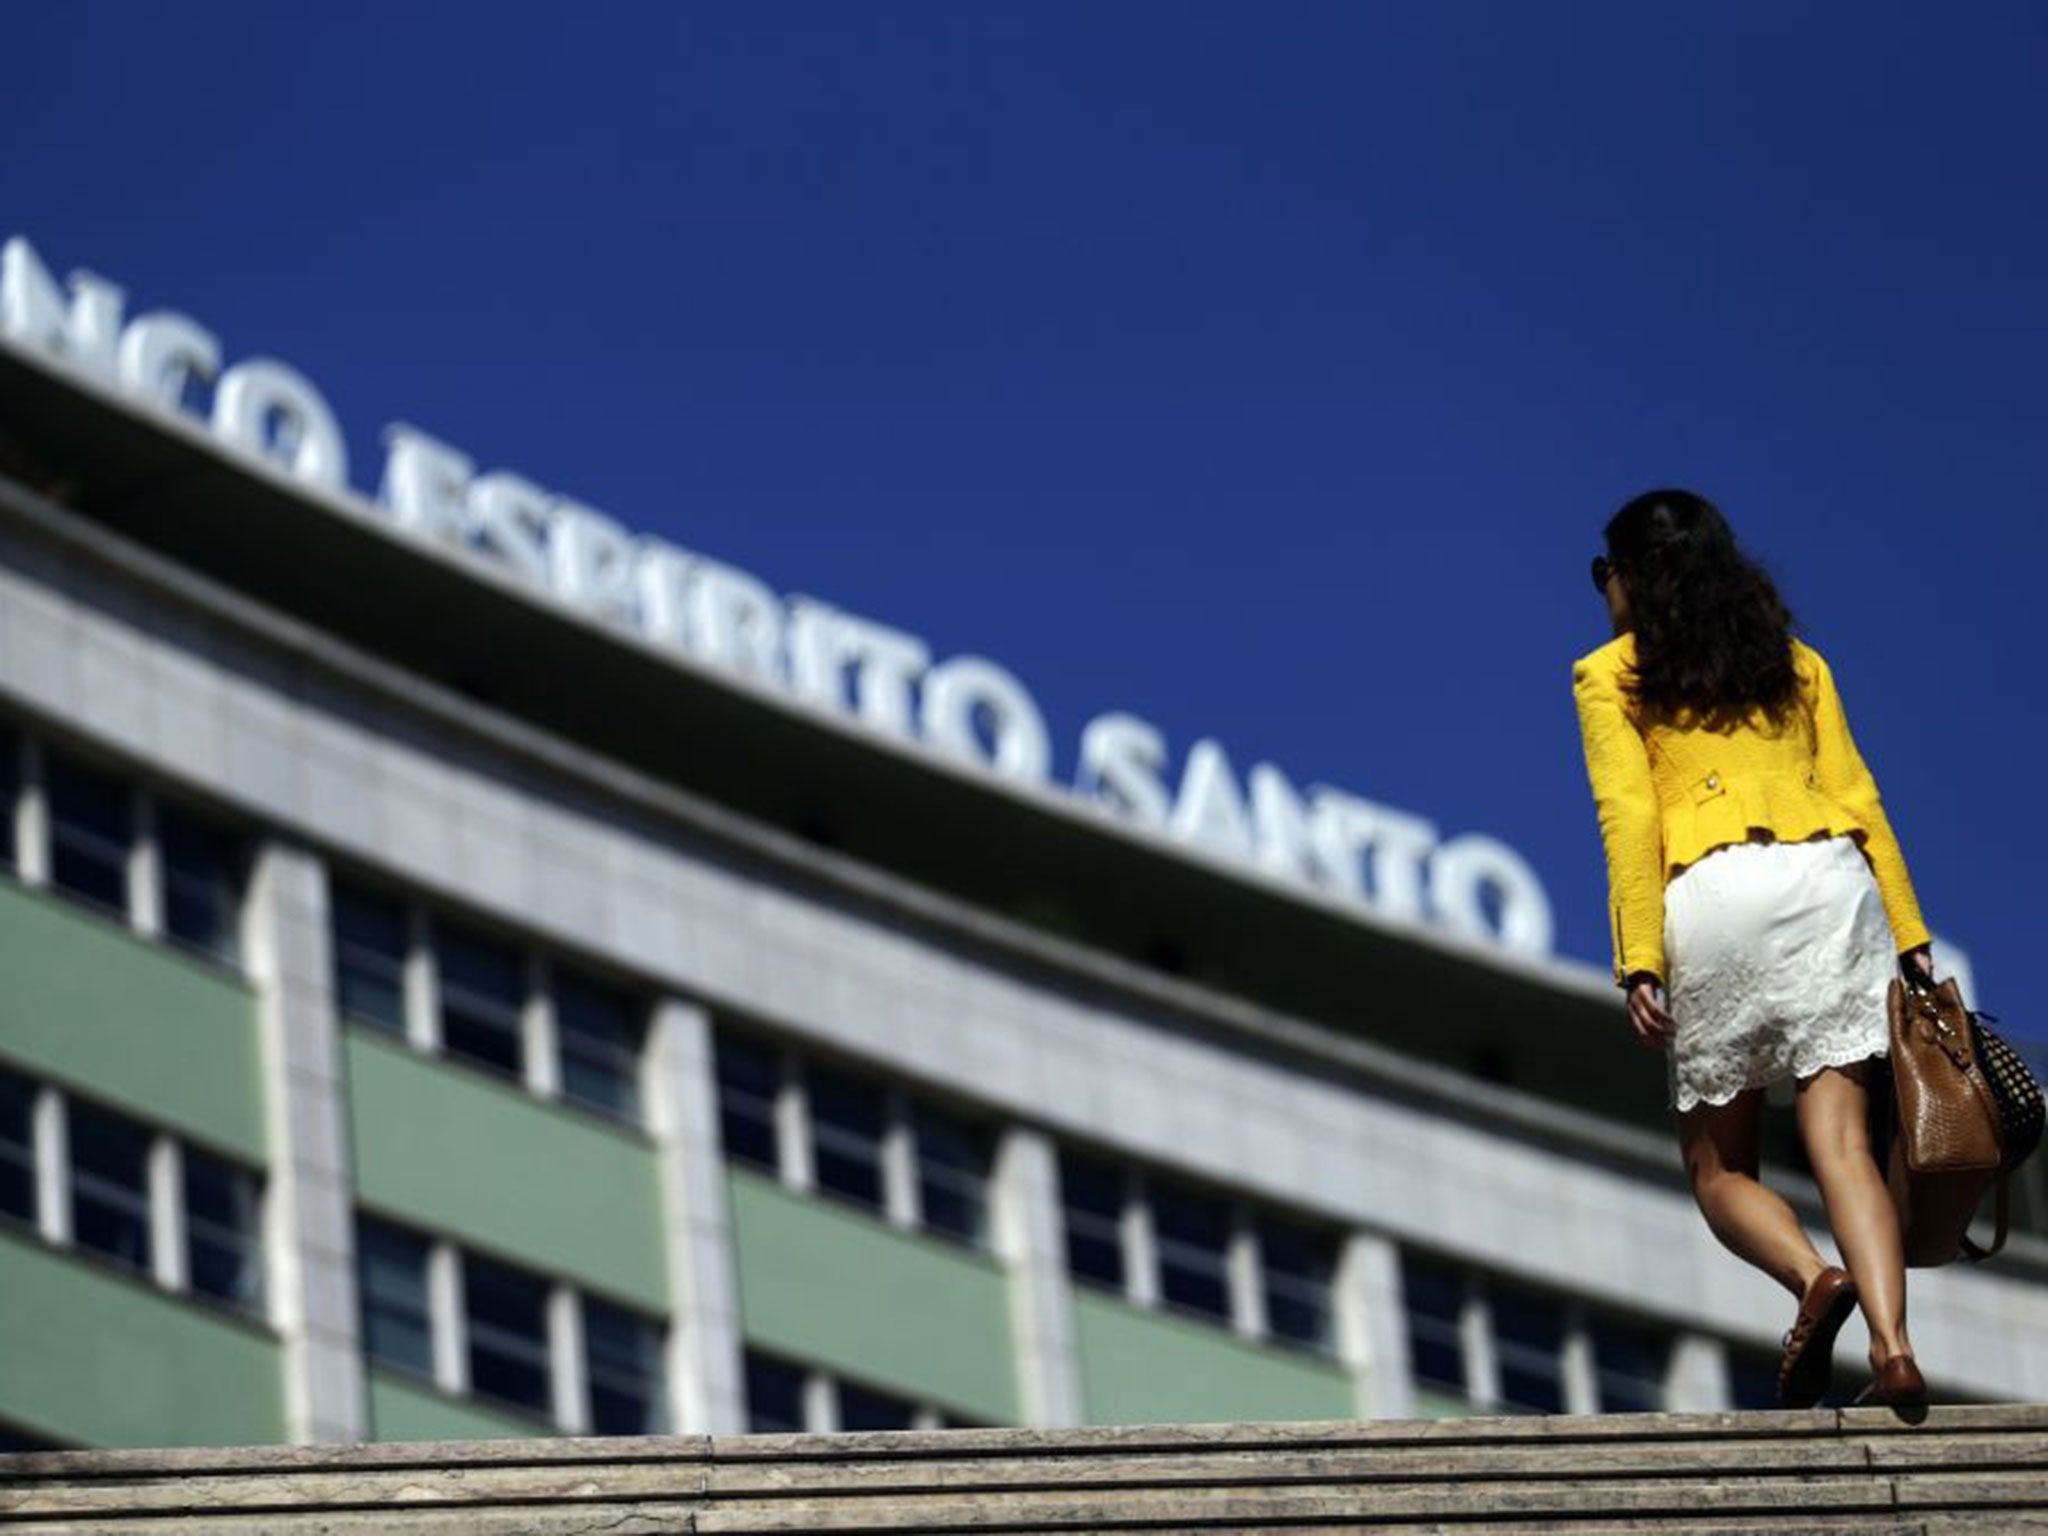 Banco Espirito Santo in Lisbon, Portugal: The bank needed bailing out despite passing stress tests